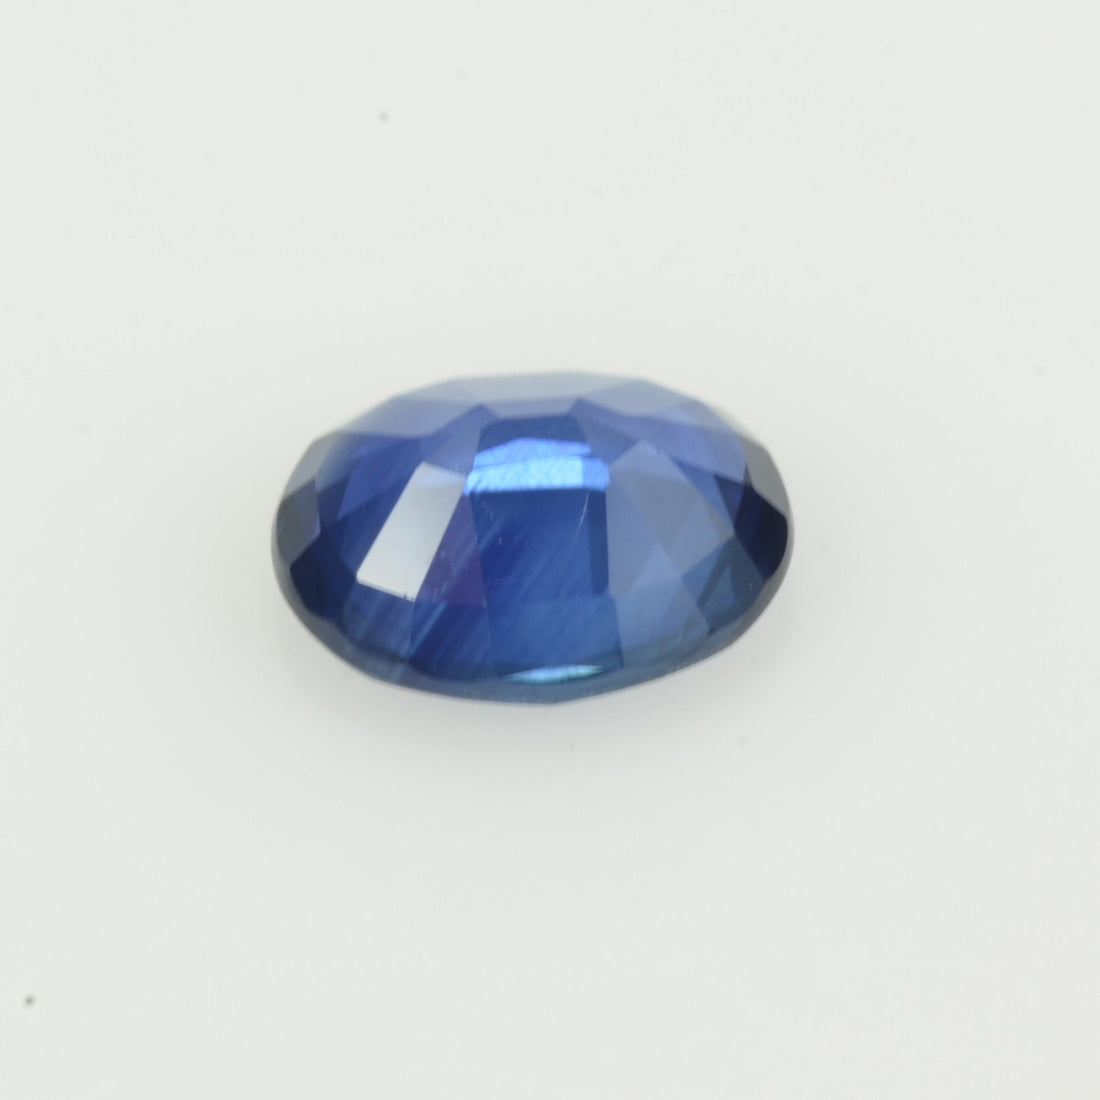 0.83 cts Natural Blue Sapphire Loose Gemstone Oval Cut